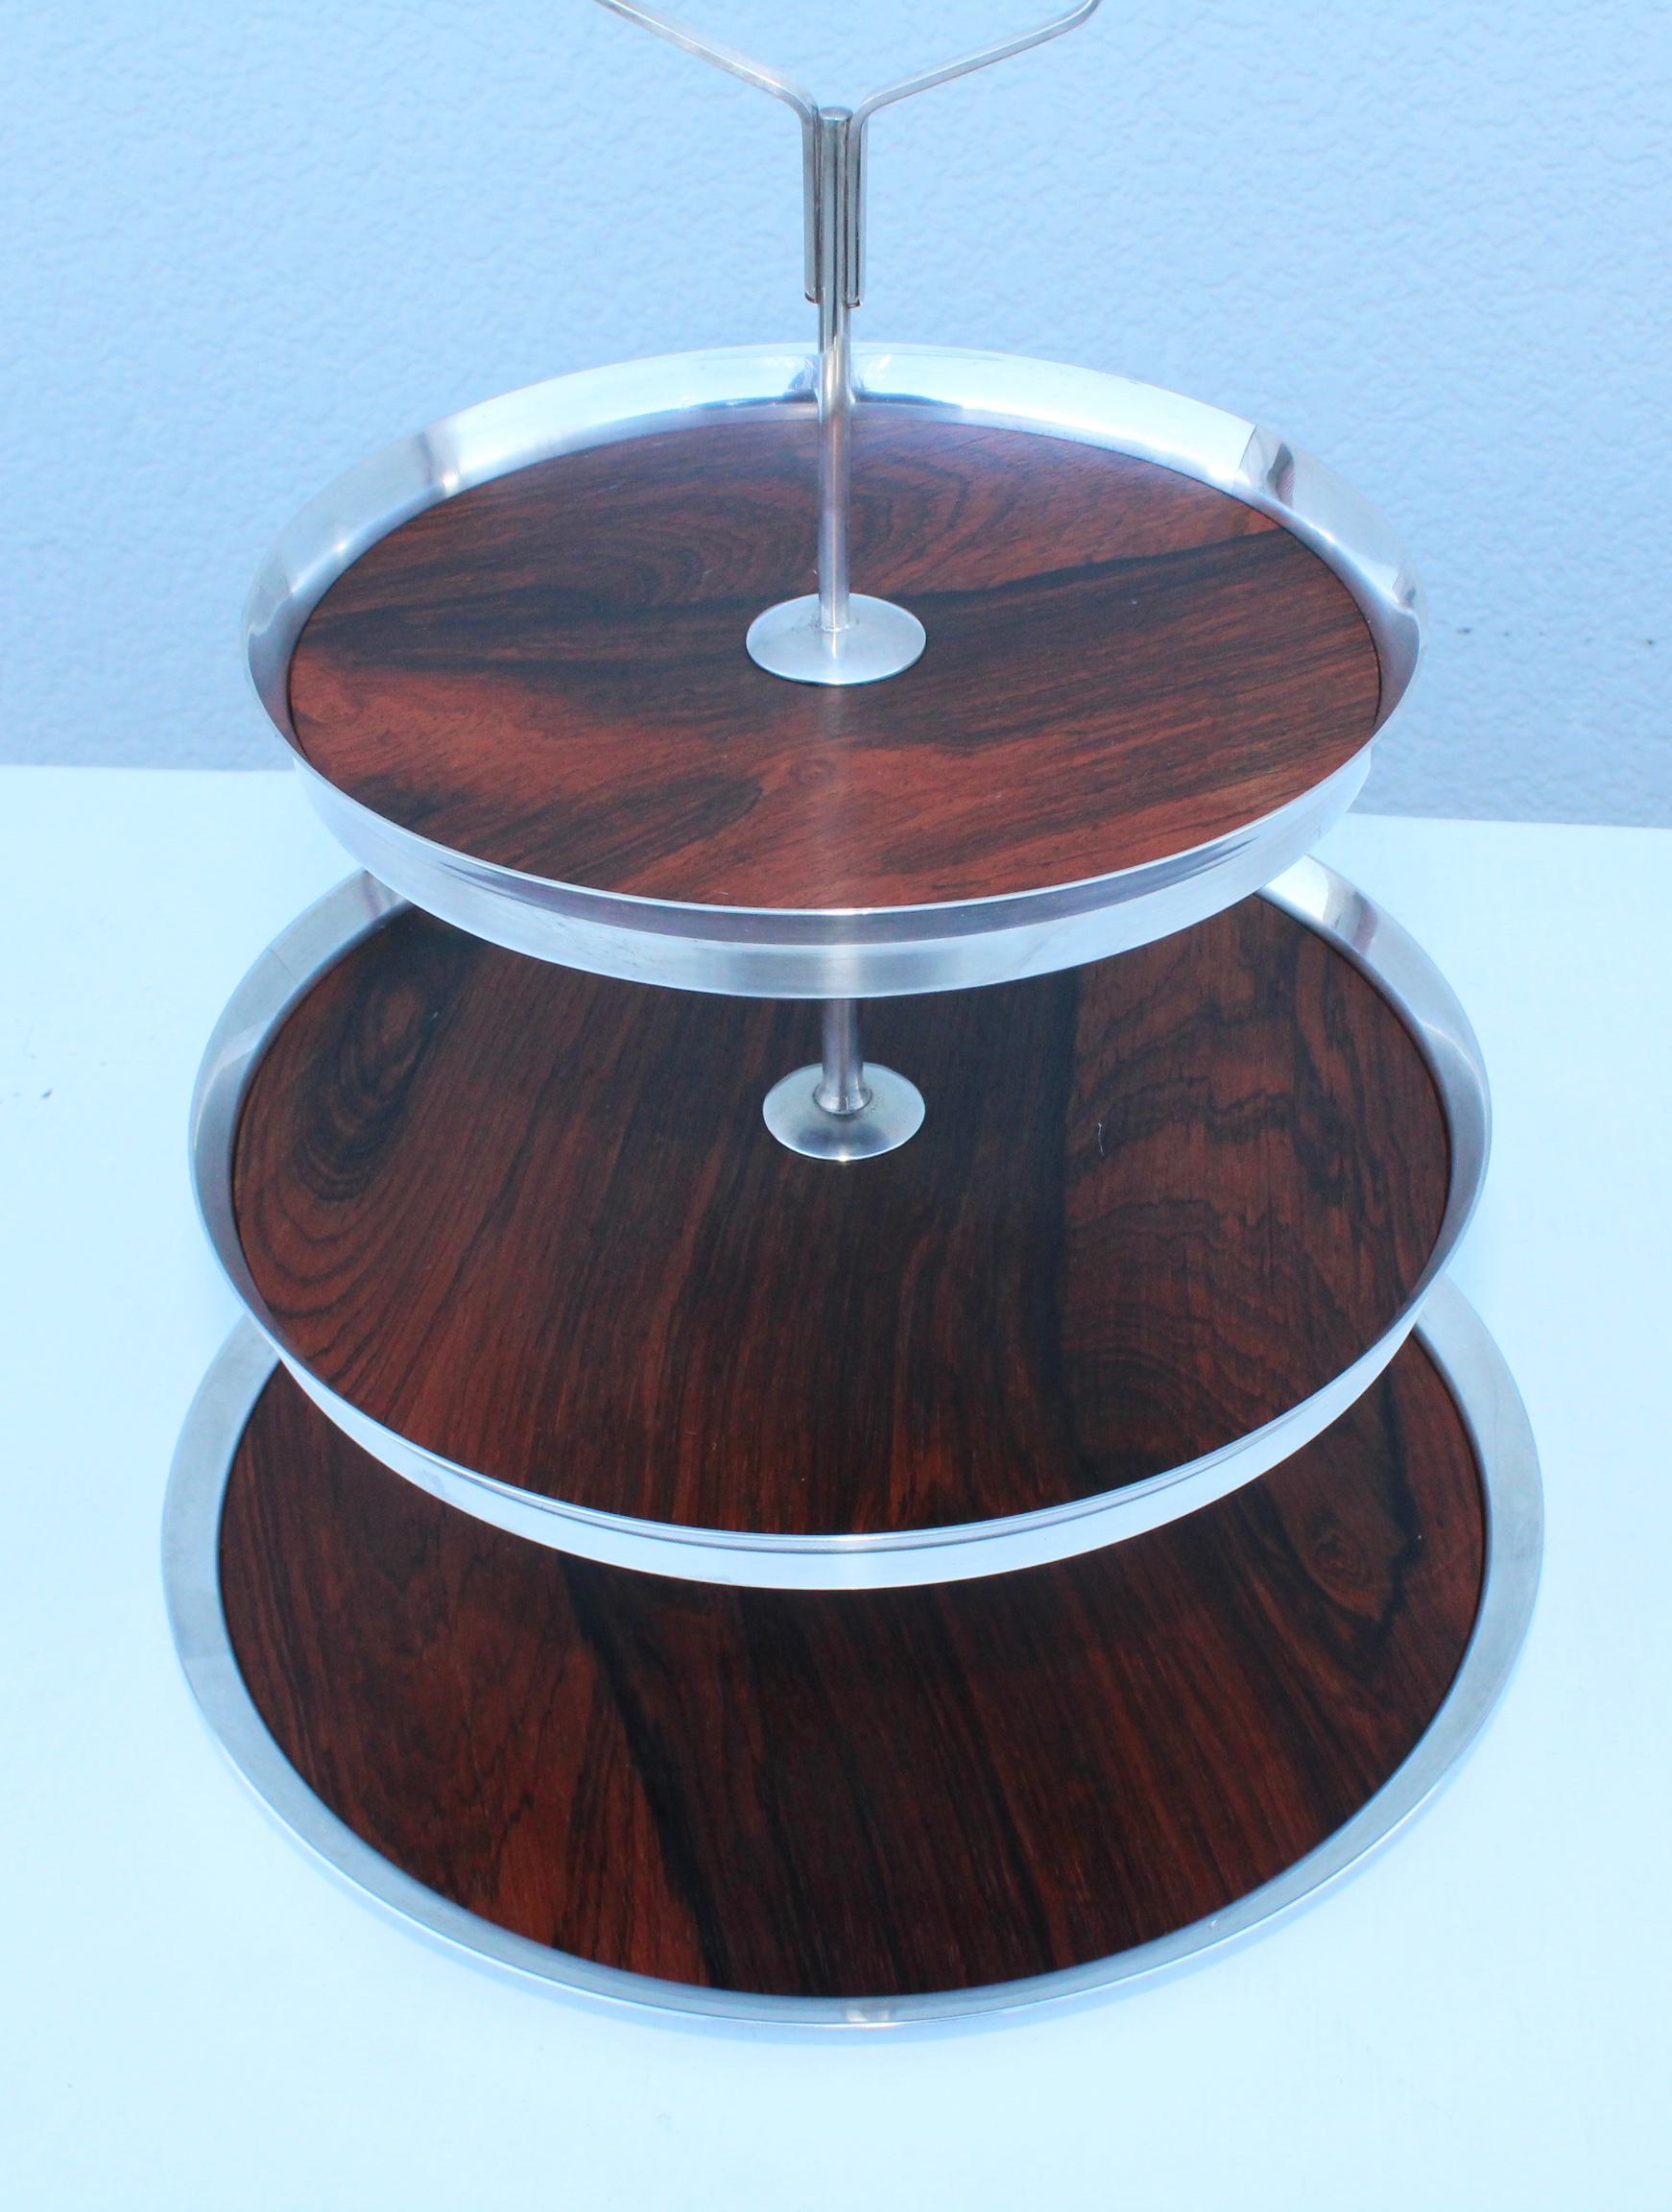 1950s modern 3-tier silver plate and rosewood cake stand from Denmark.